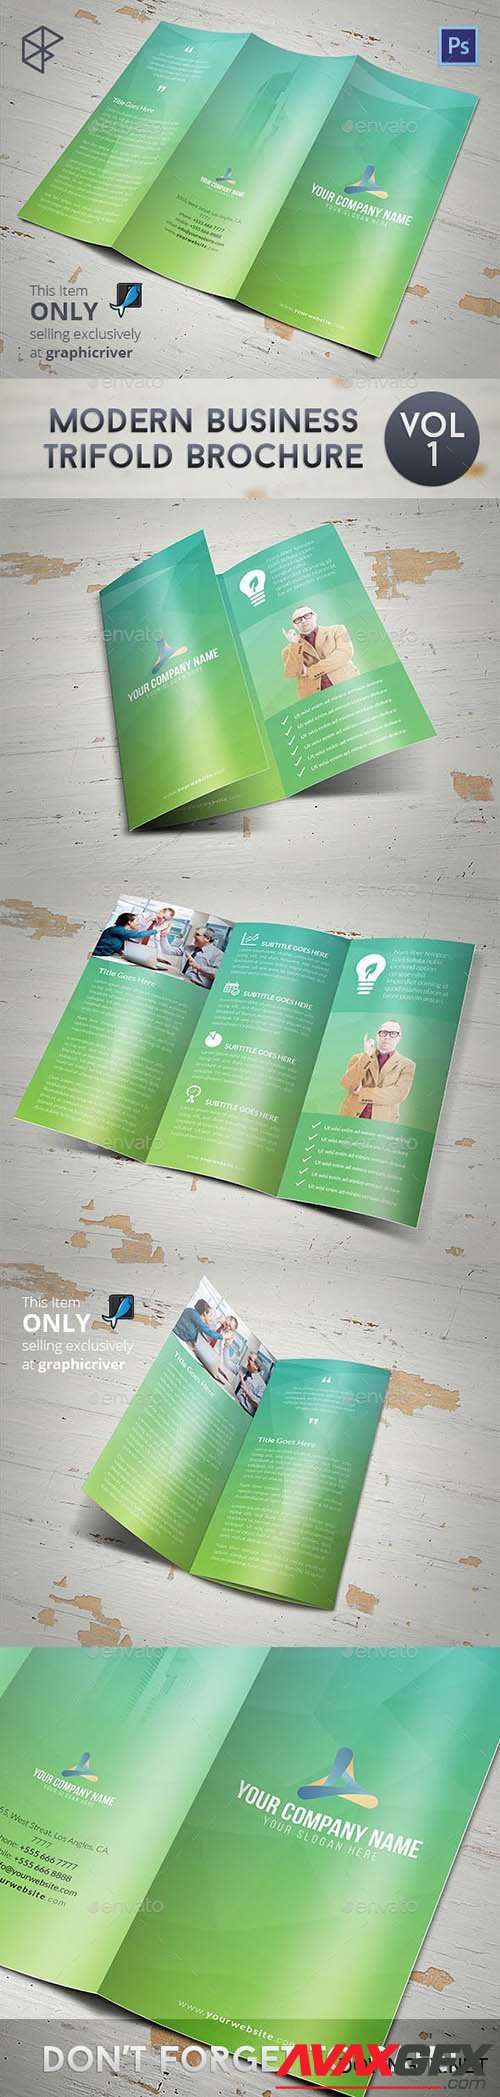 Graphicriver - Modern Business Trifold Brochure 7998989